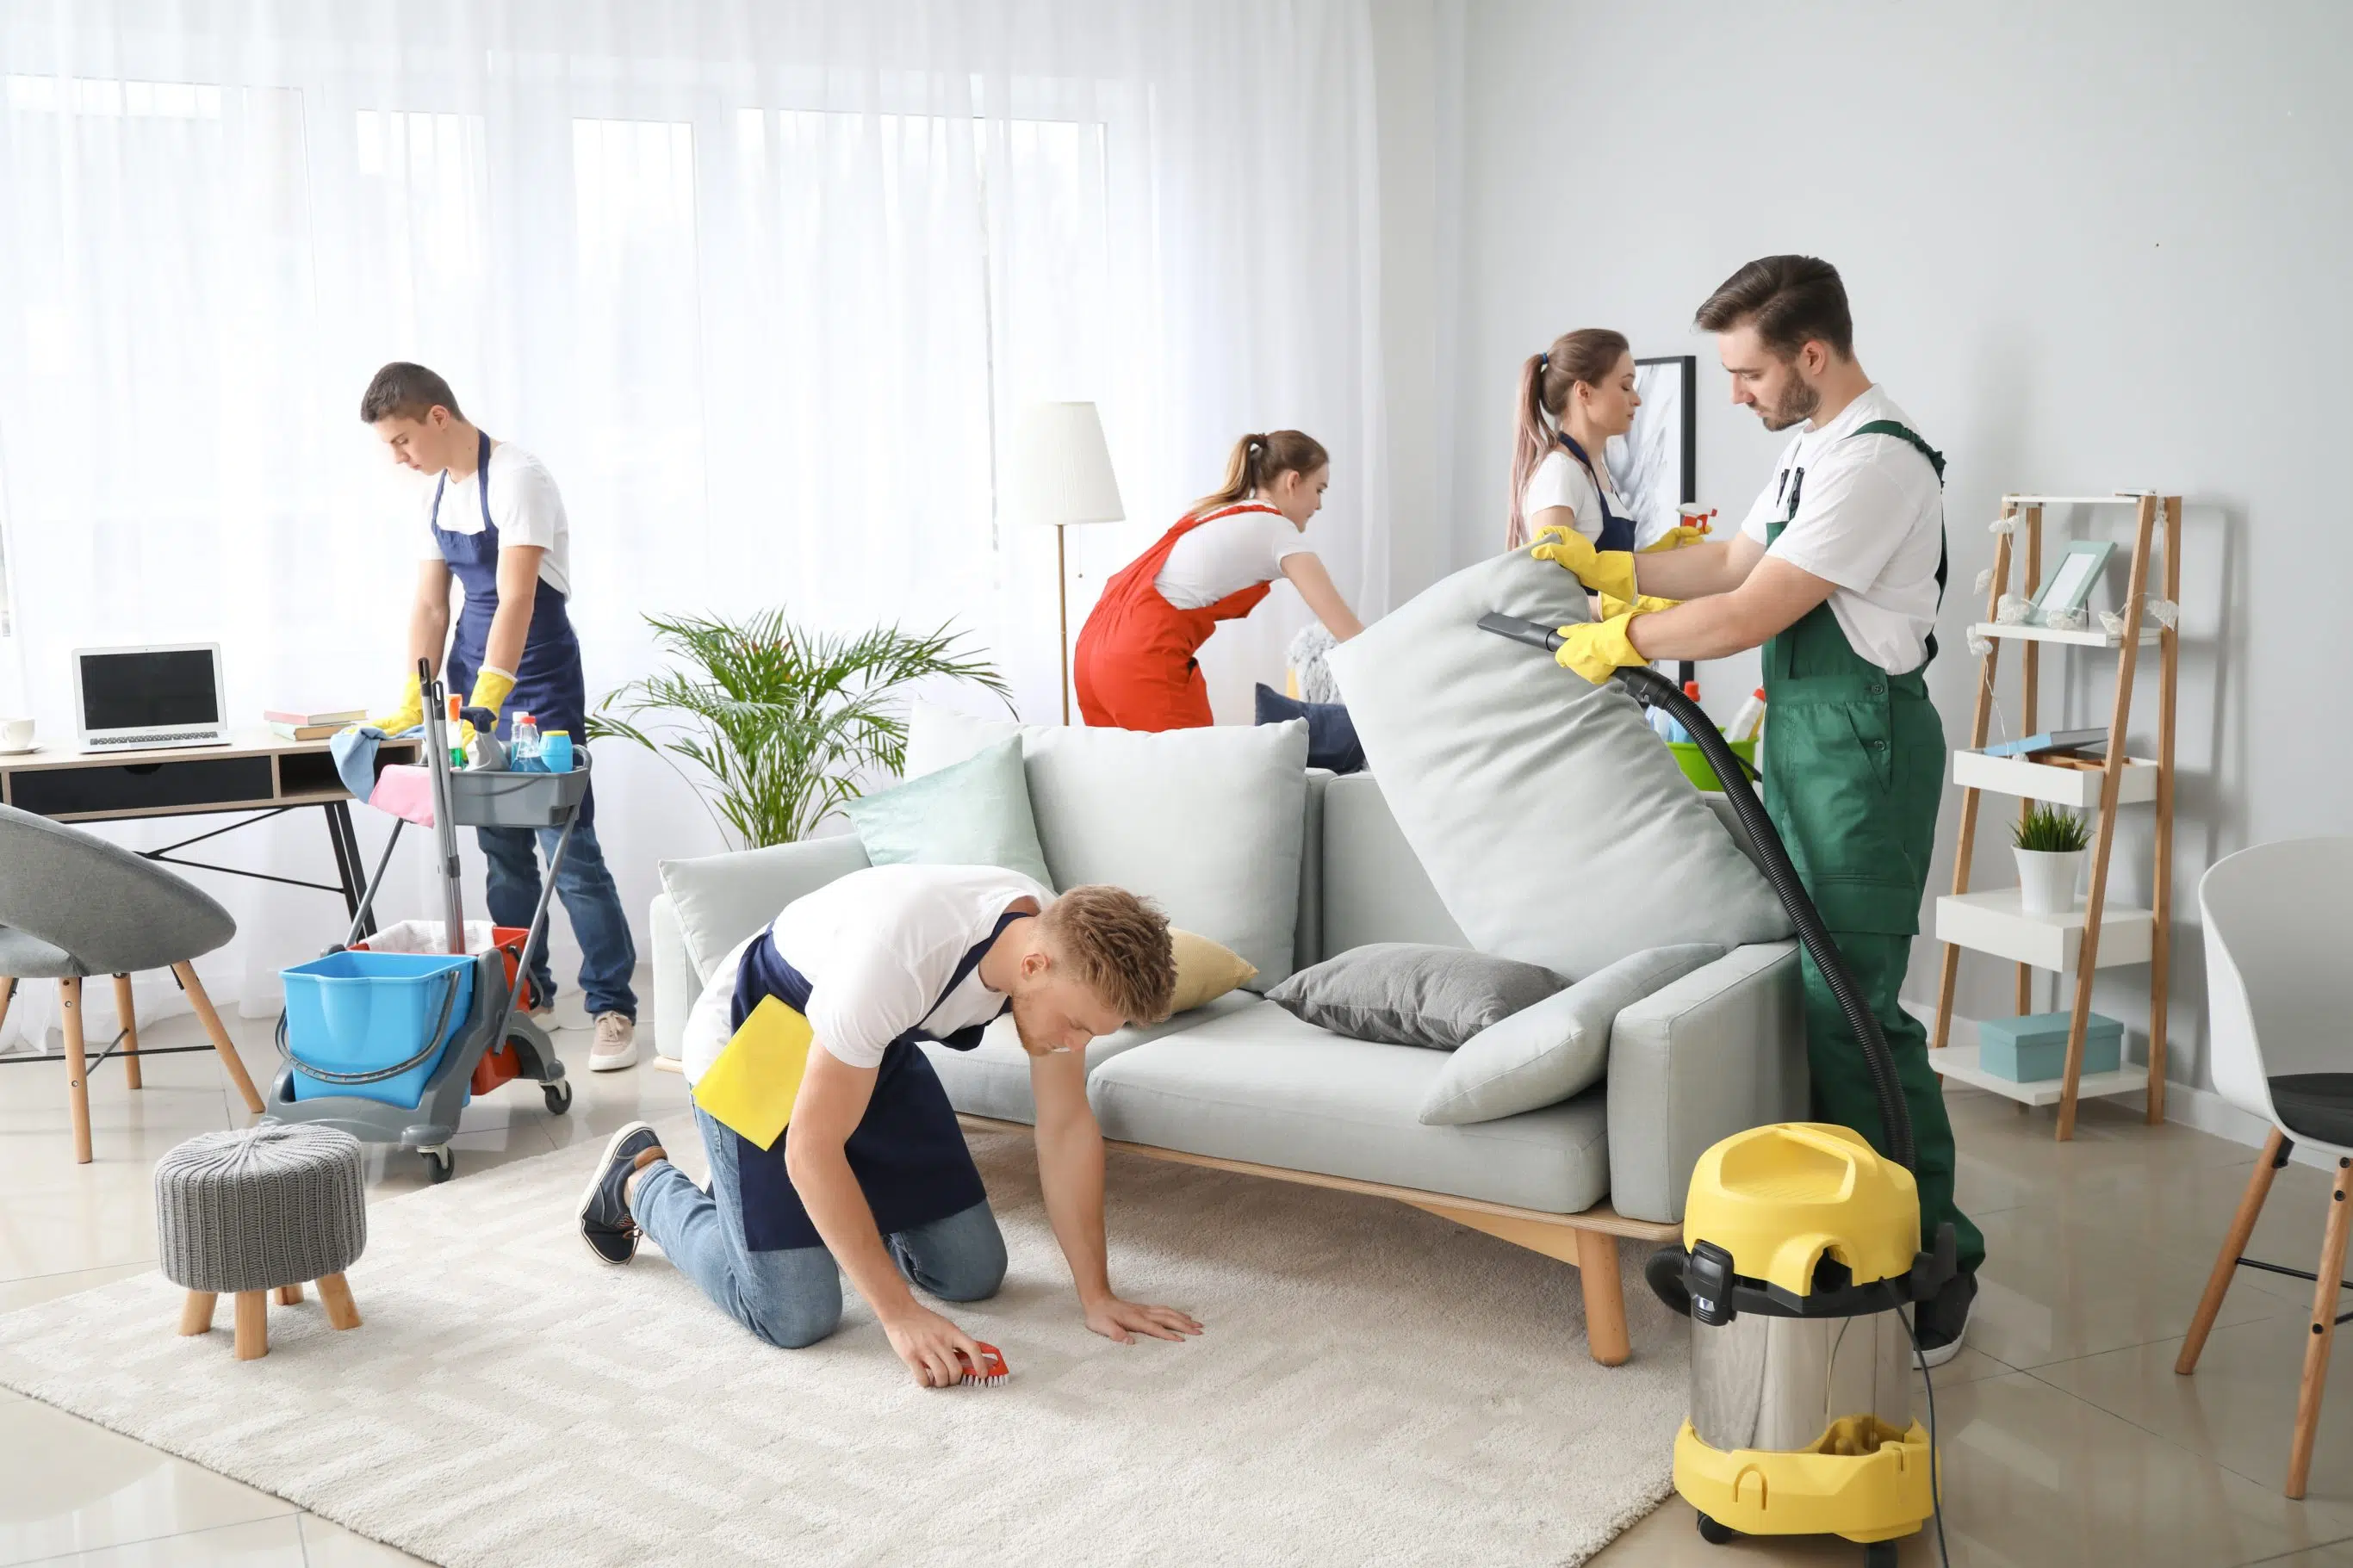 Do You Professionally-Clean the Home You're SELLING?